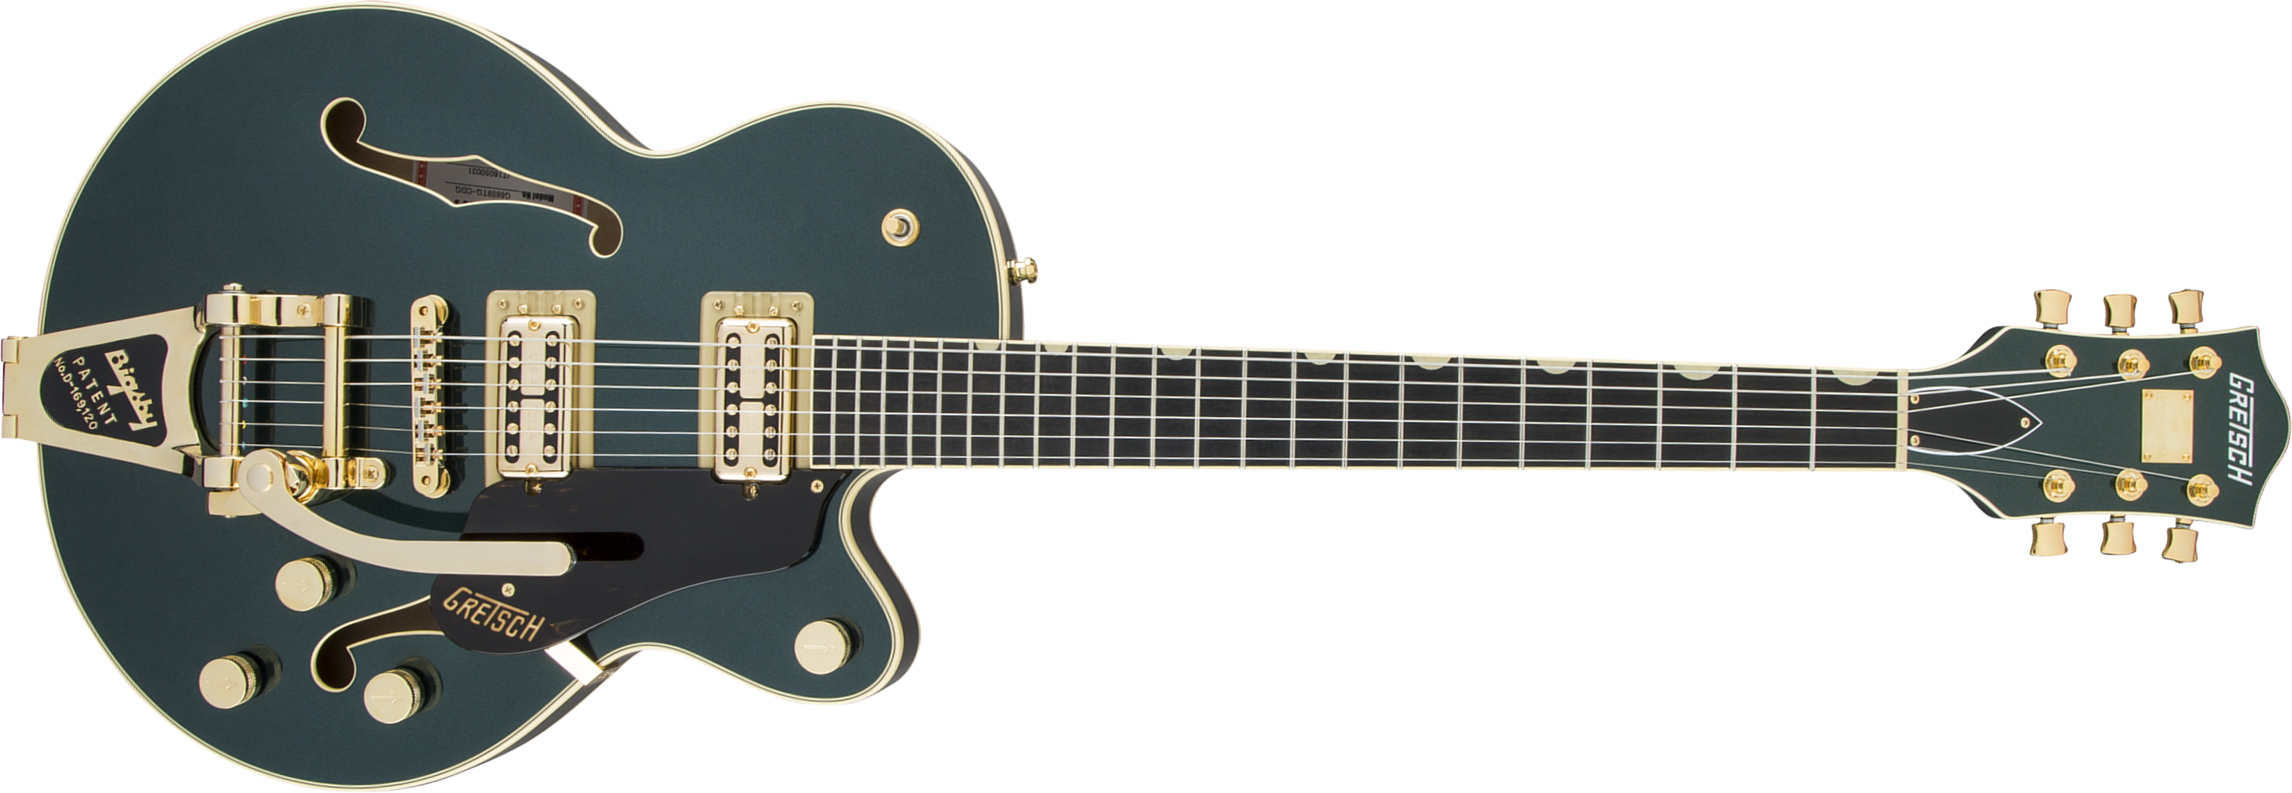 Gretsch G6659tg Broadkaster Jr Center Bloc Players Edition Bigsby Pro Jap 2h Trem Eb - Cadillac Green - Semi-Hollow E-Gitarre - Main picture